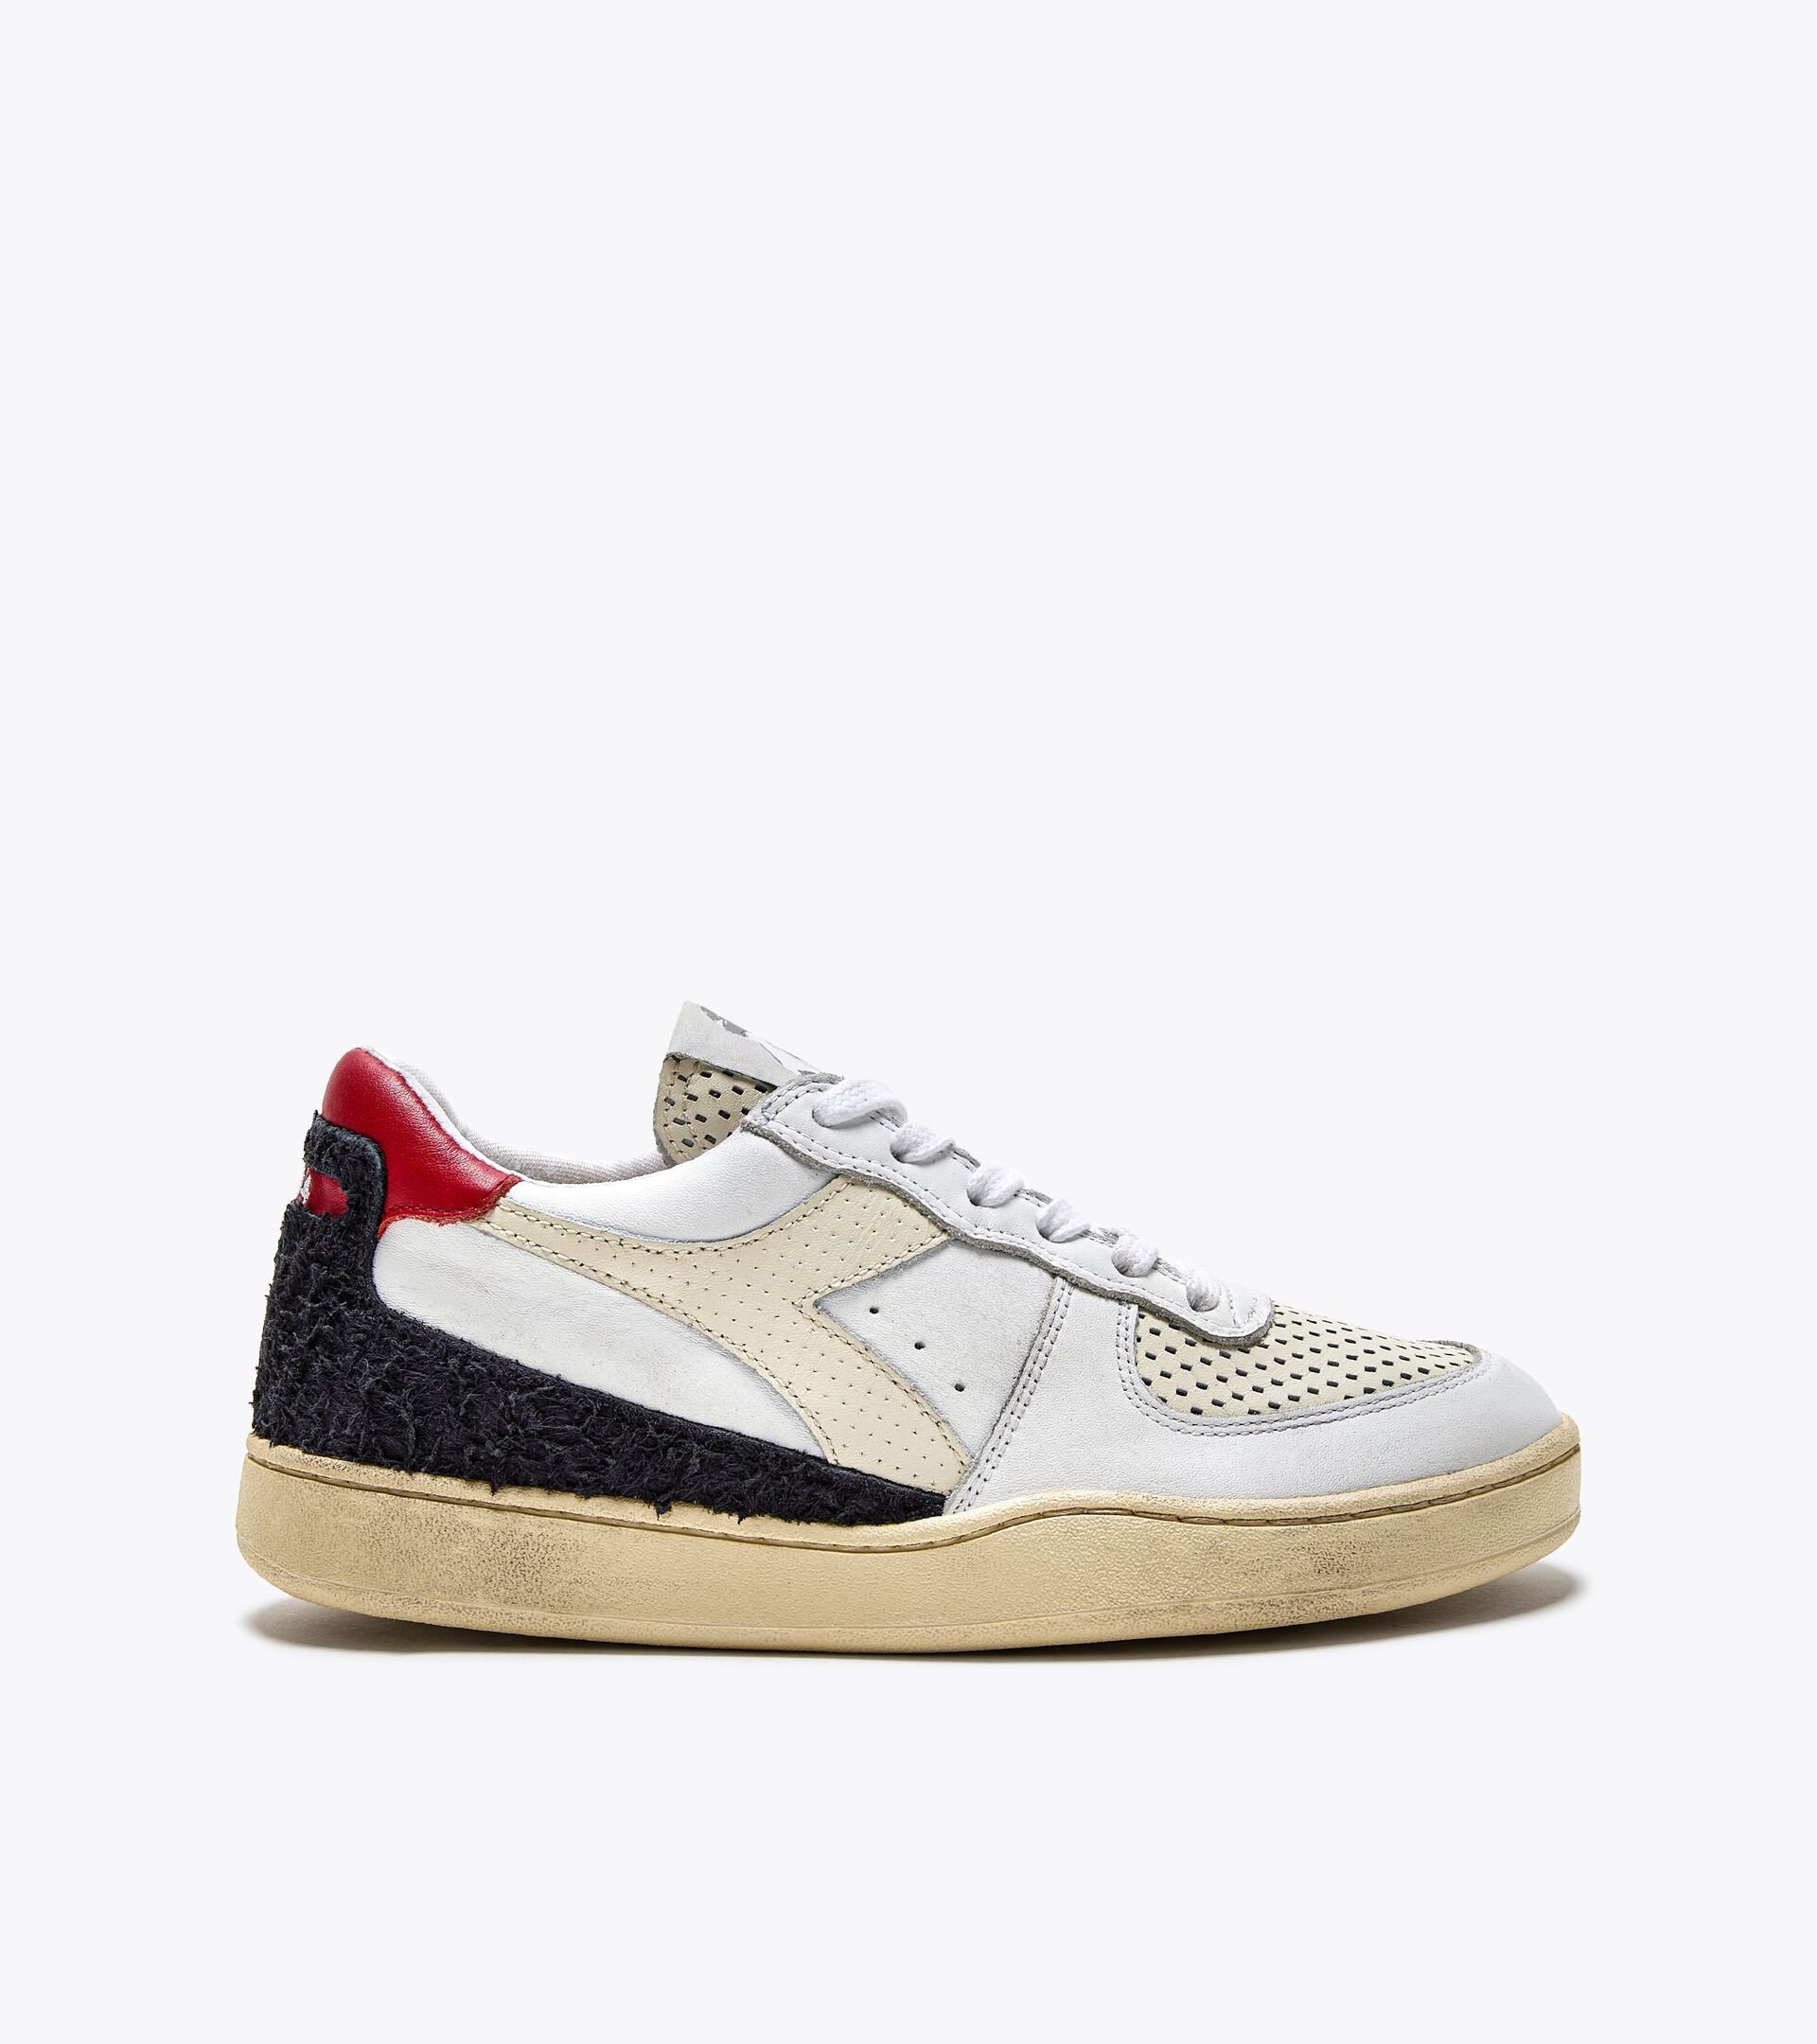 Chaussures Heritage - Made in Italy - Gender neutral MI BASKET LOW PUNCHED ITA X DINO MENEGHIN BLANCHE - Diadora